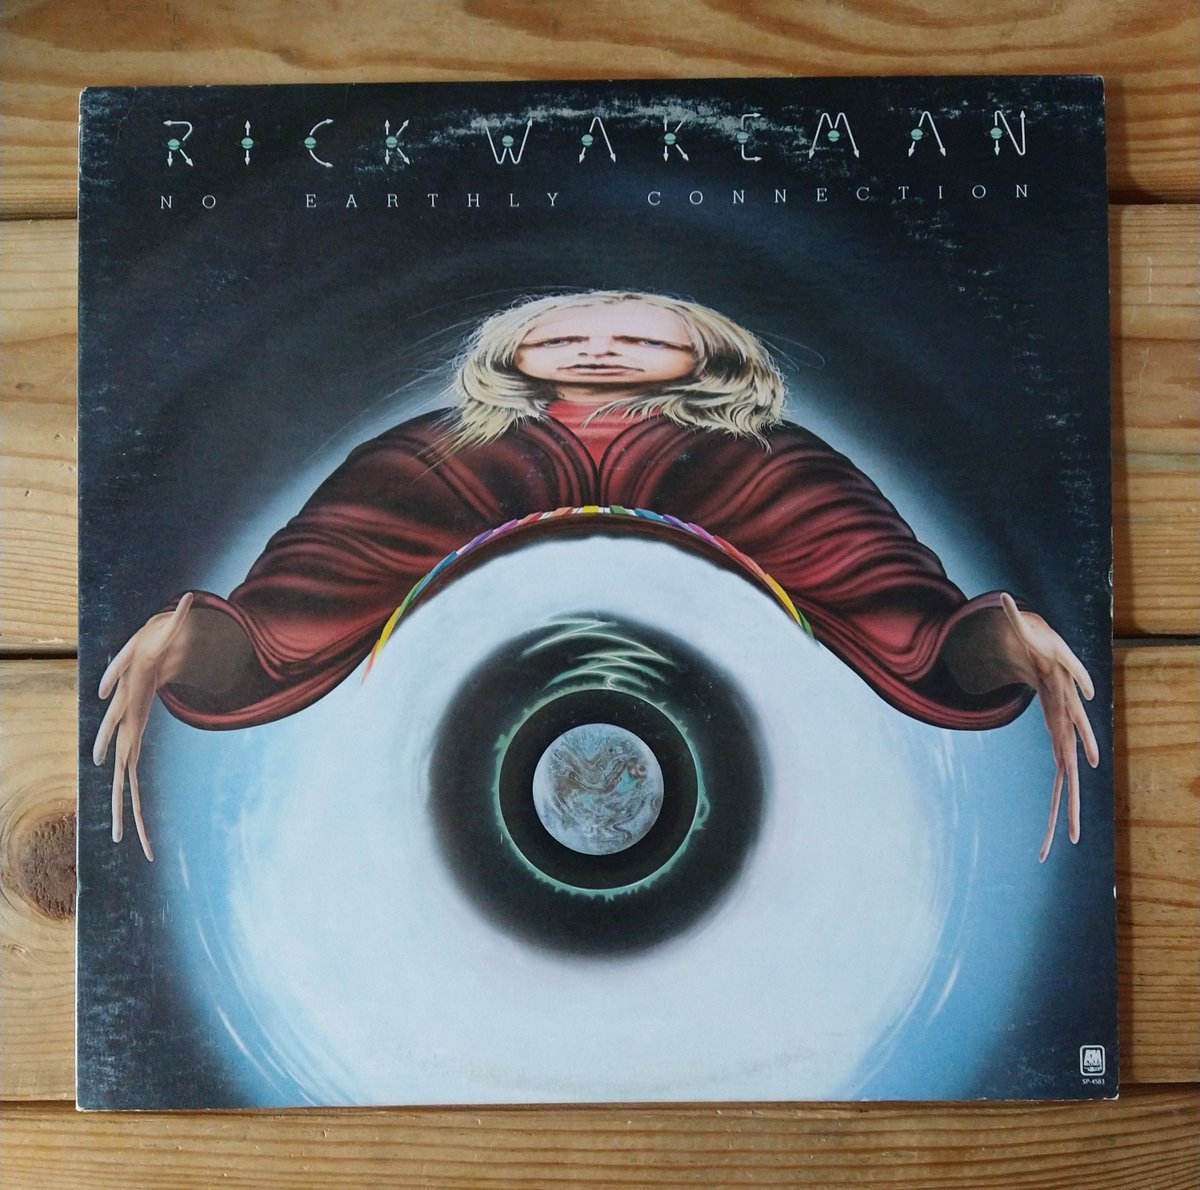 In the, 'damn I haven't played this in a long time' category.  Spinning- #RickWakeman #Yes #vinyl #vinylcollection #vinylcommunity #vinylcollector #vinylrecords